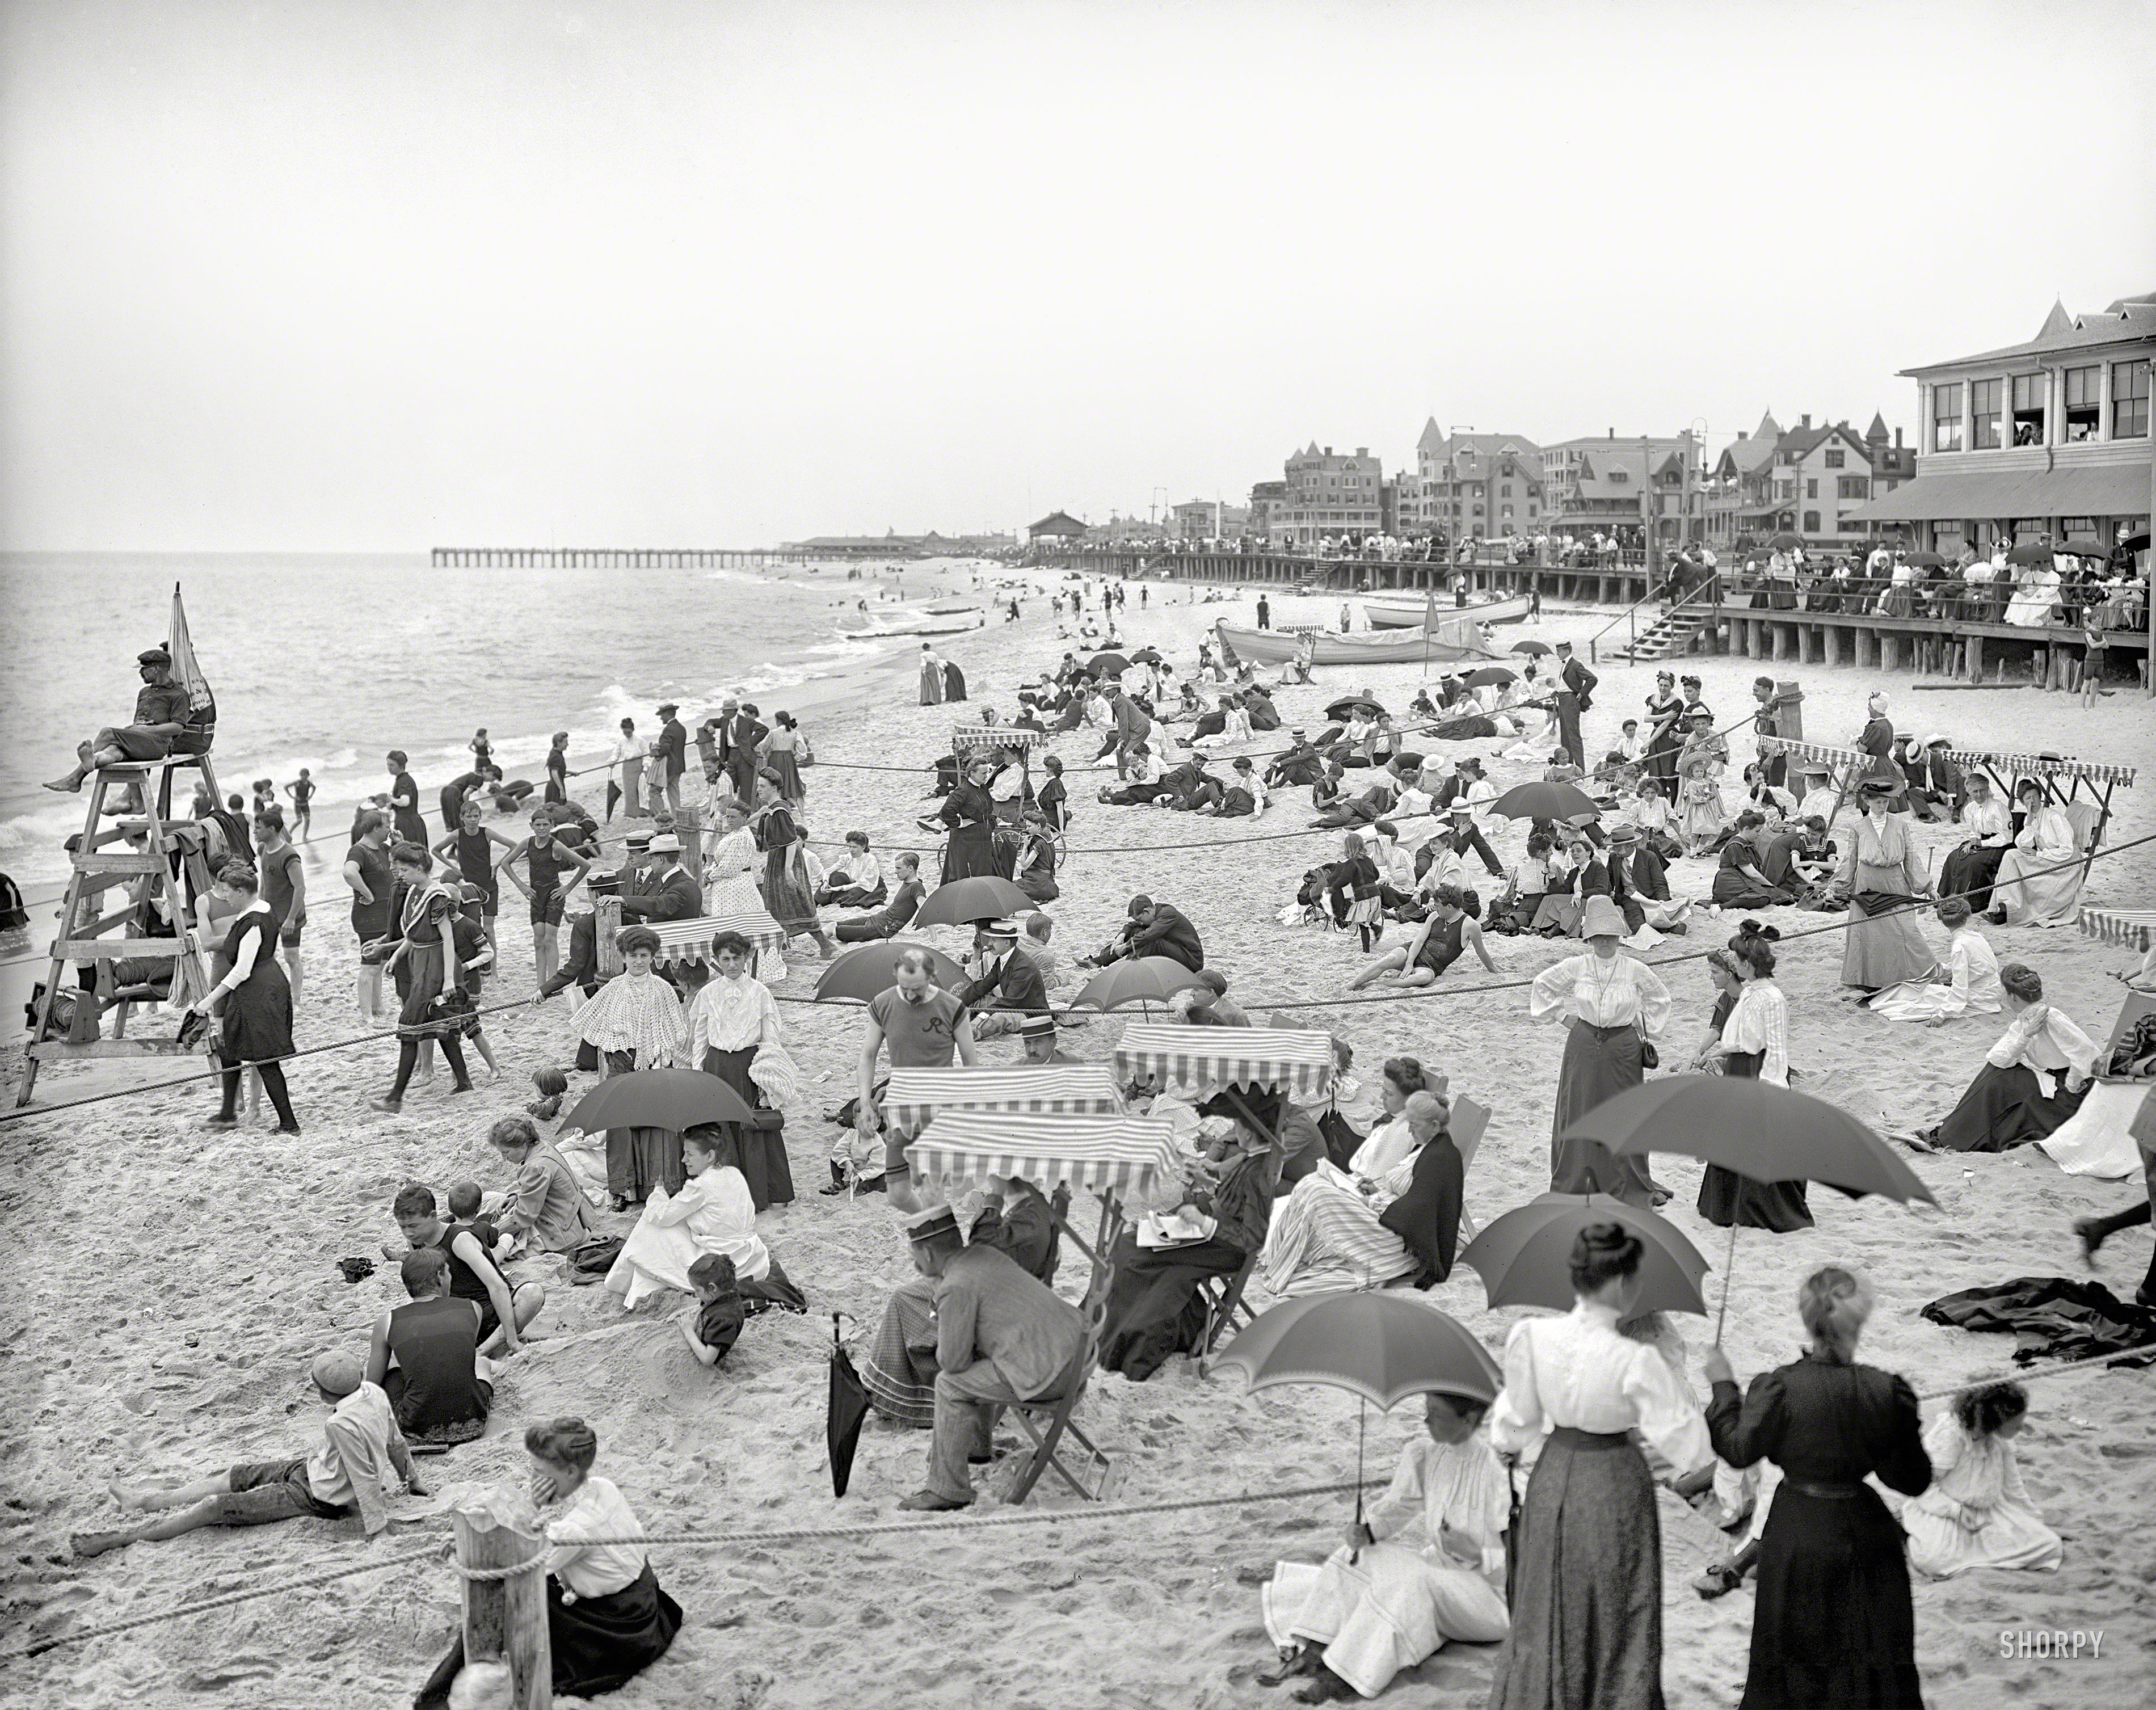 The Jersey shore circa 1905. "On the beach at Ross' pavilion, Ocean Grove, N.J." Short of tuxes and ballgowns, it's hard to imagine being any more dressed up at the beach. (And cheer up, guy in the middle -- your problems are over by now.) 8x10 inch dry plate glass negative, Detroit Publishing Company. View full size.